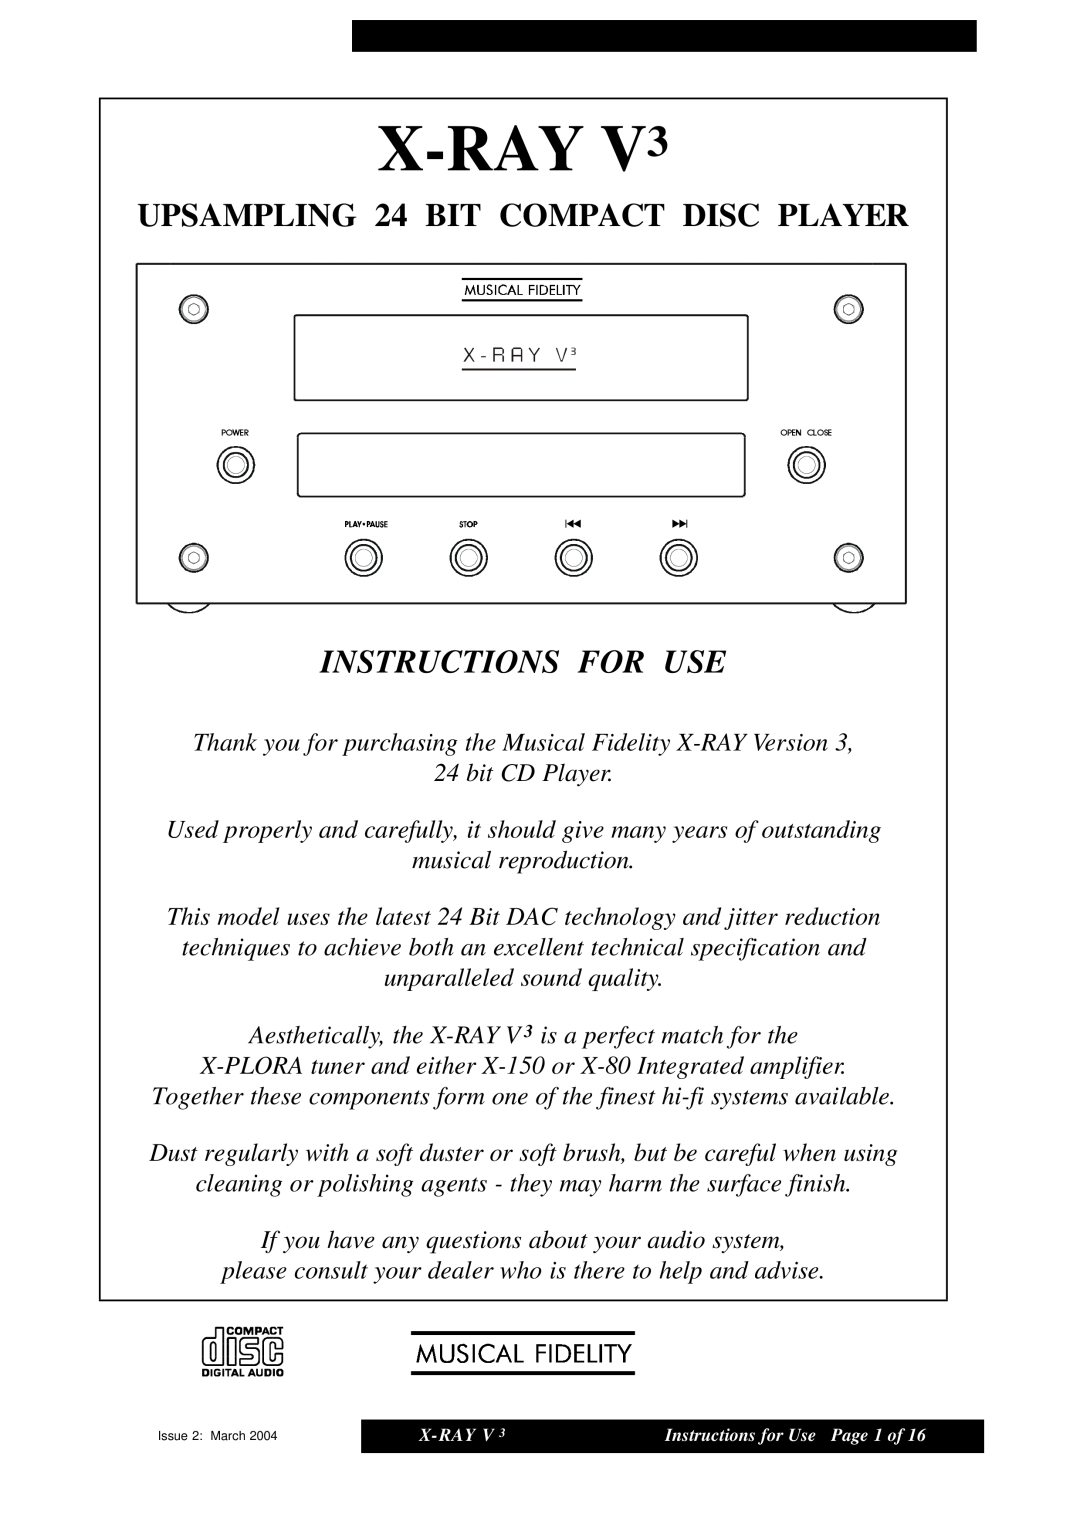 Musical Fidelity X-RAY V3 manual UPSAMPLING 24 BIT COMPACT DISC PLAYER, Instructions For Use, X-RAYV3 